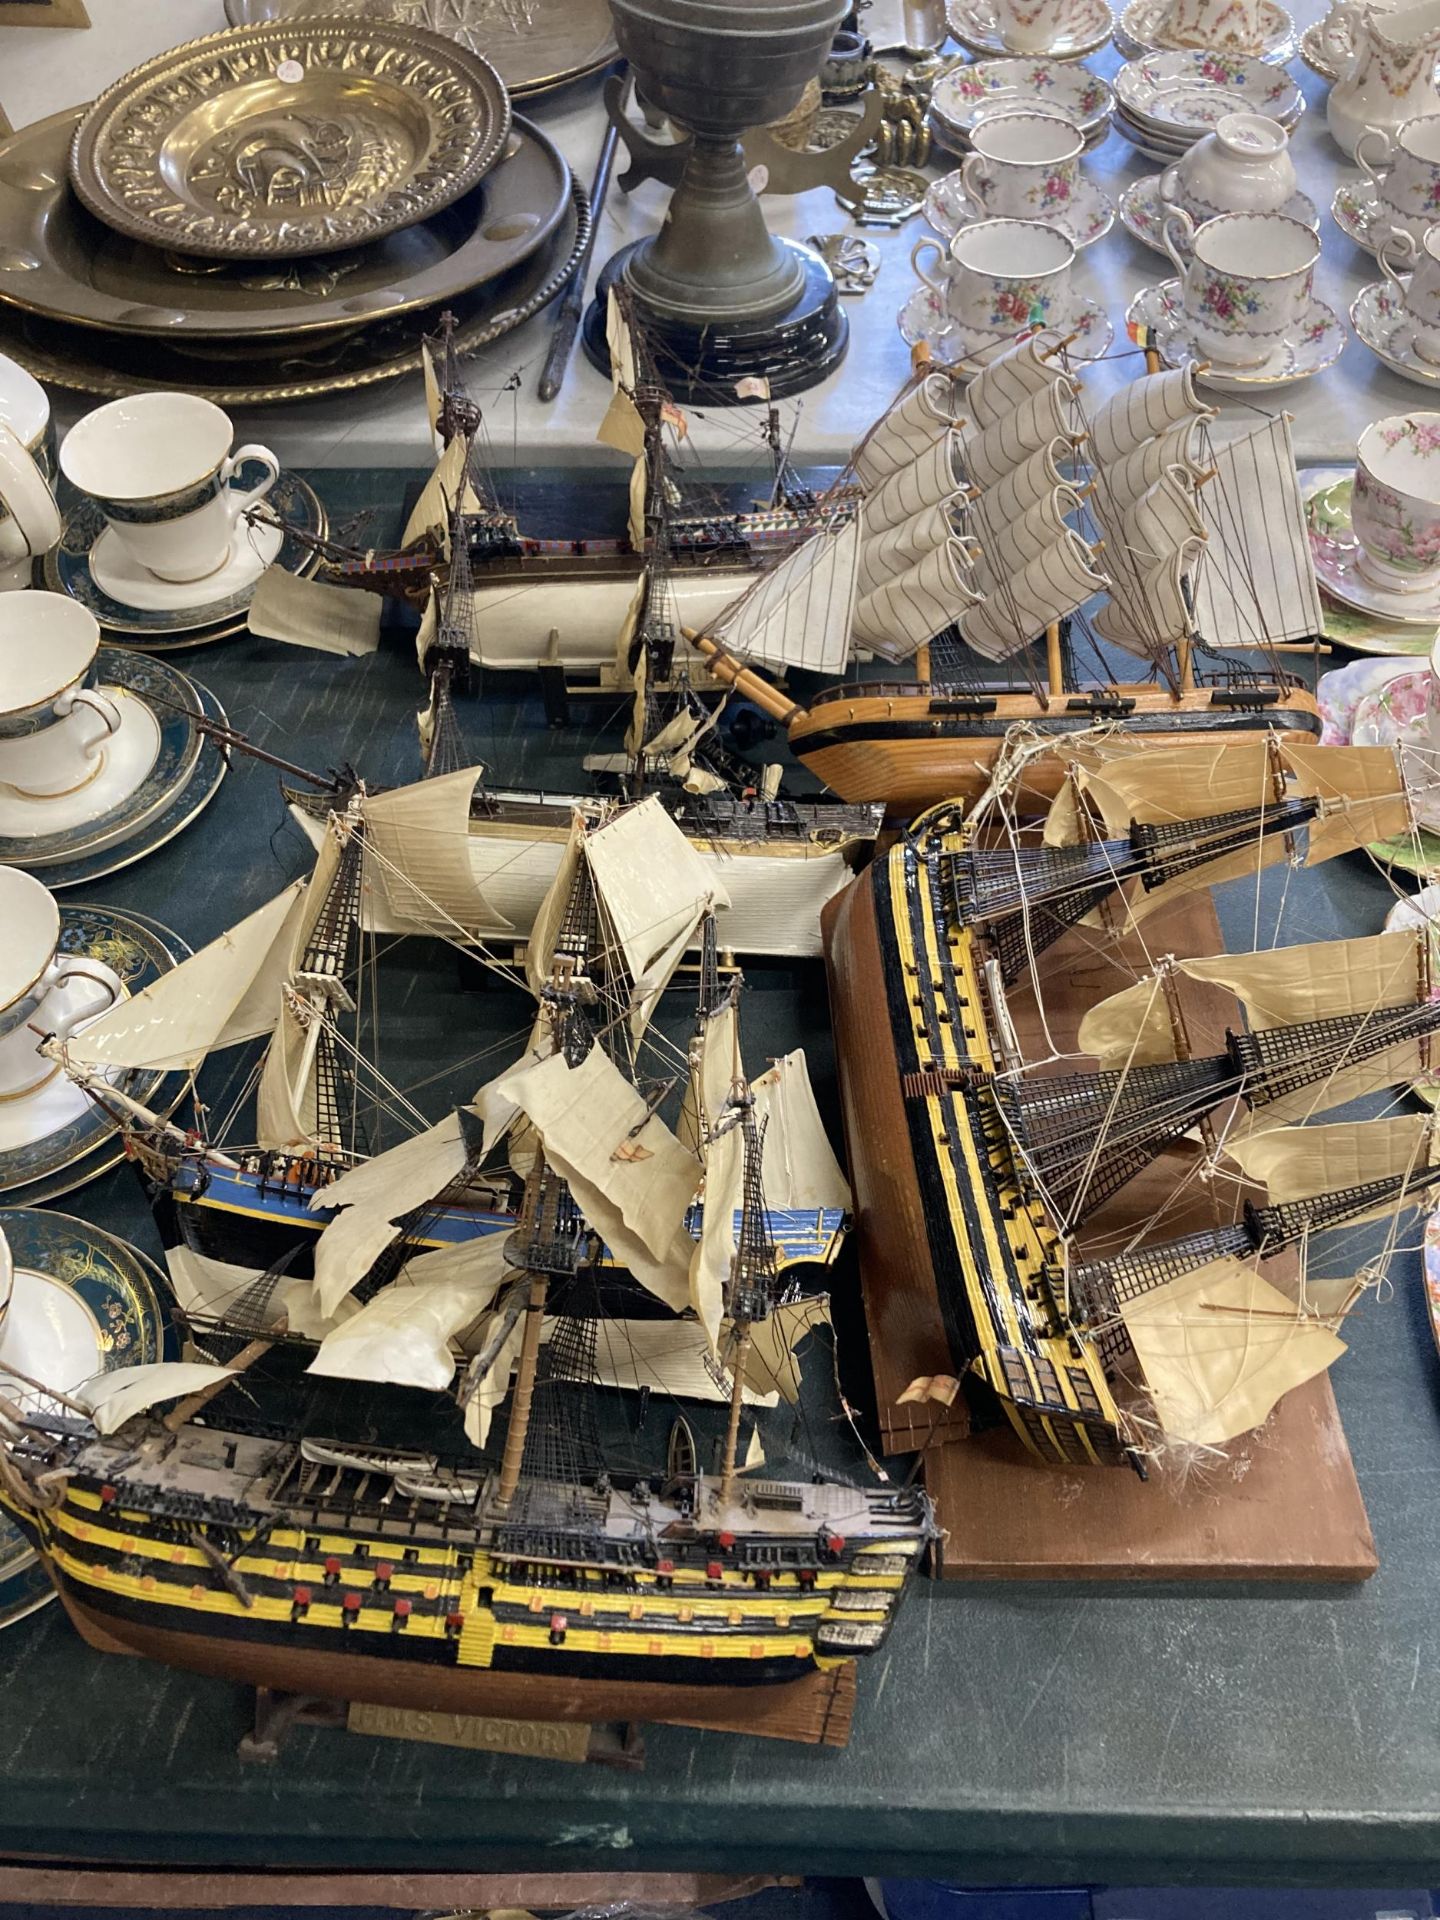 A COLLECTION OF SAILING SHIPS TO INCLUDE HMS VICTORY, THE GOLDEN HIND, HMS BOUNTY, ETC